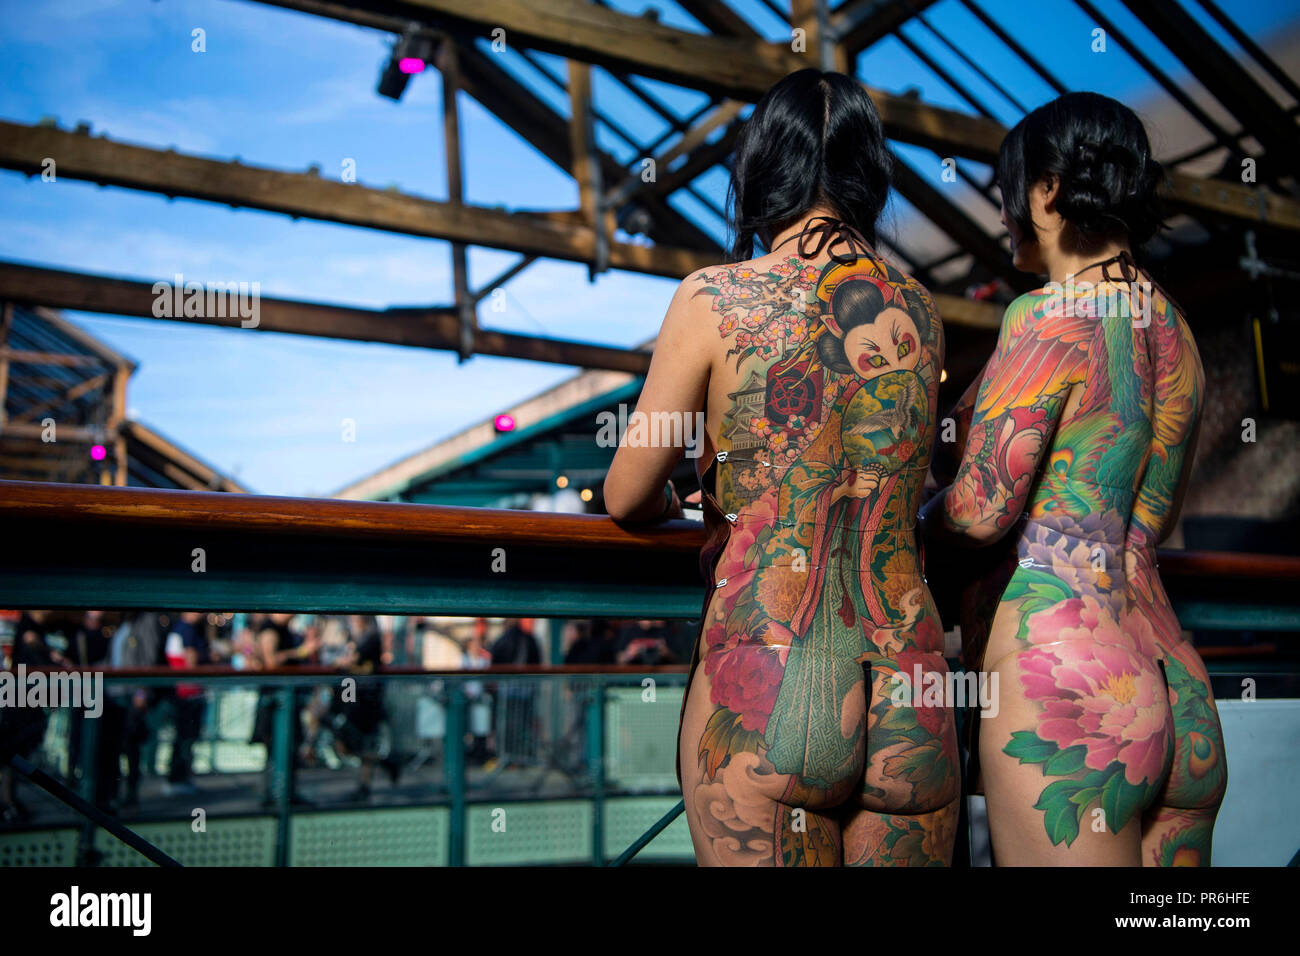 Two women show off their tattoos during the International tattoo convention at Tobacco Dock in east London. Stock Photo